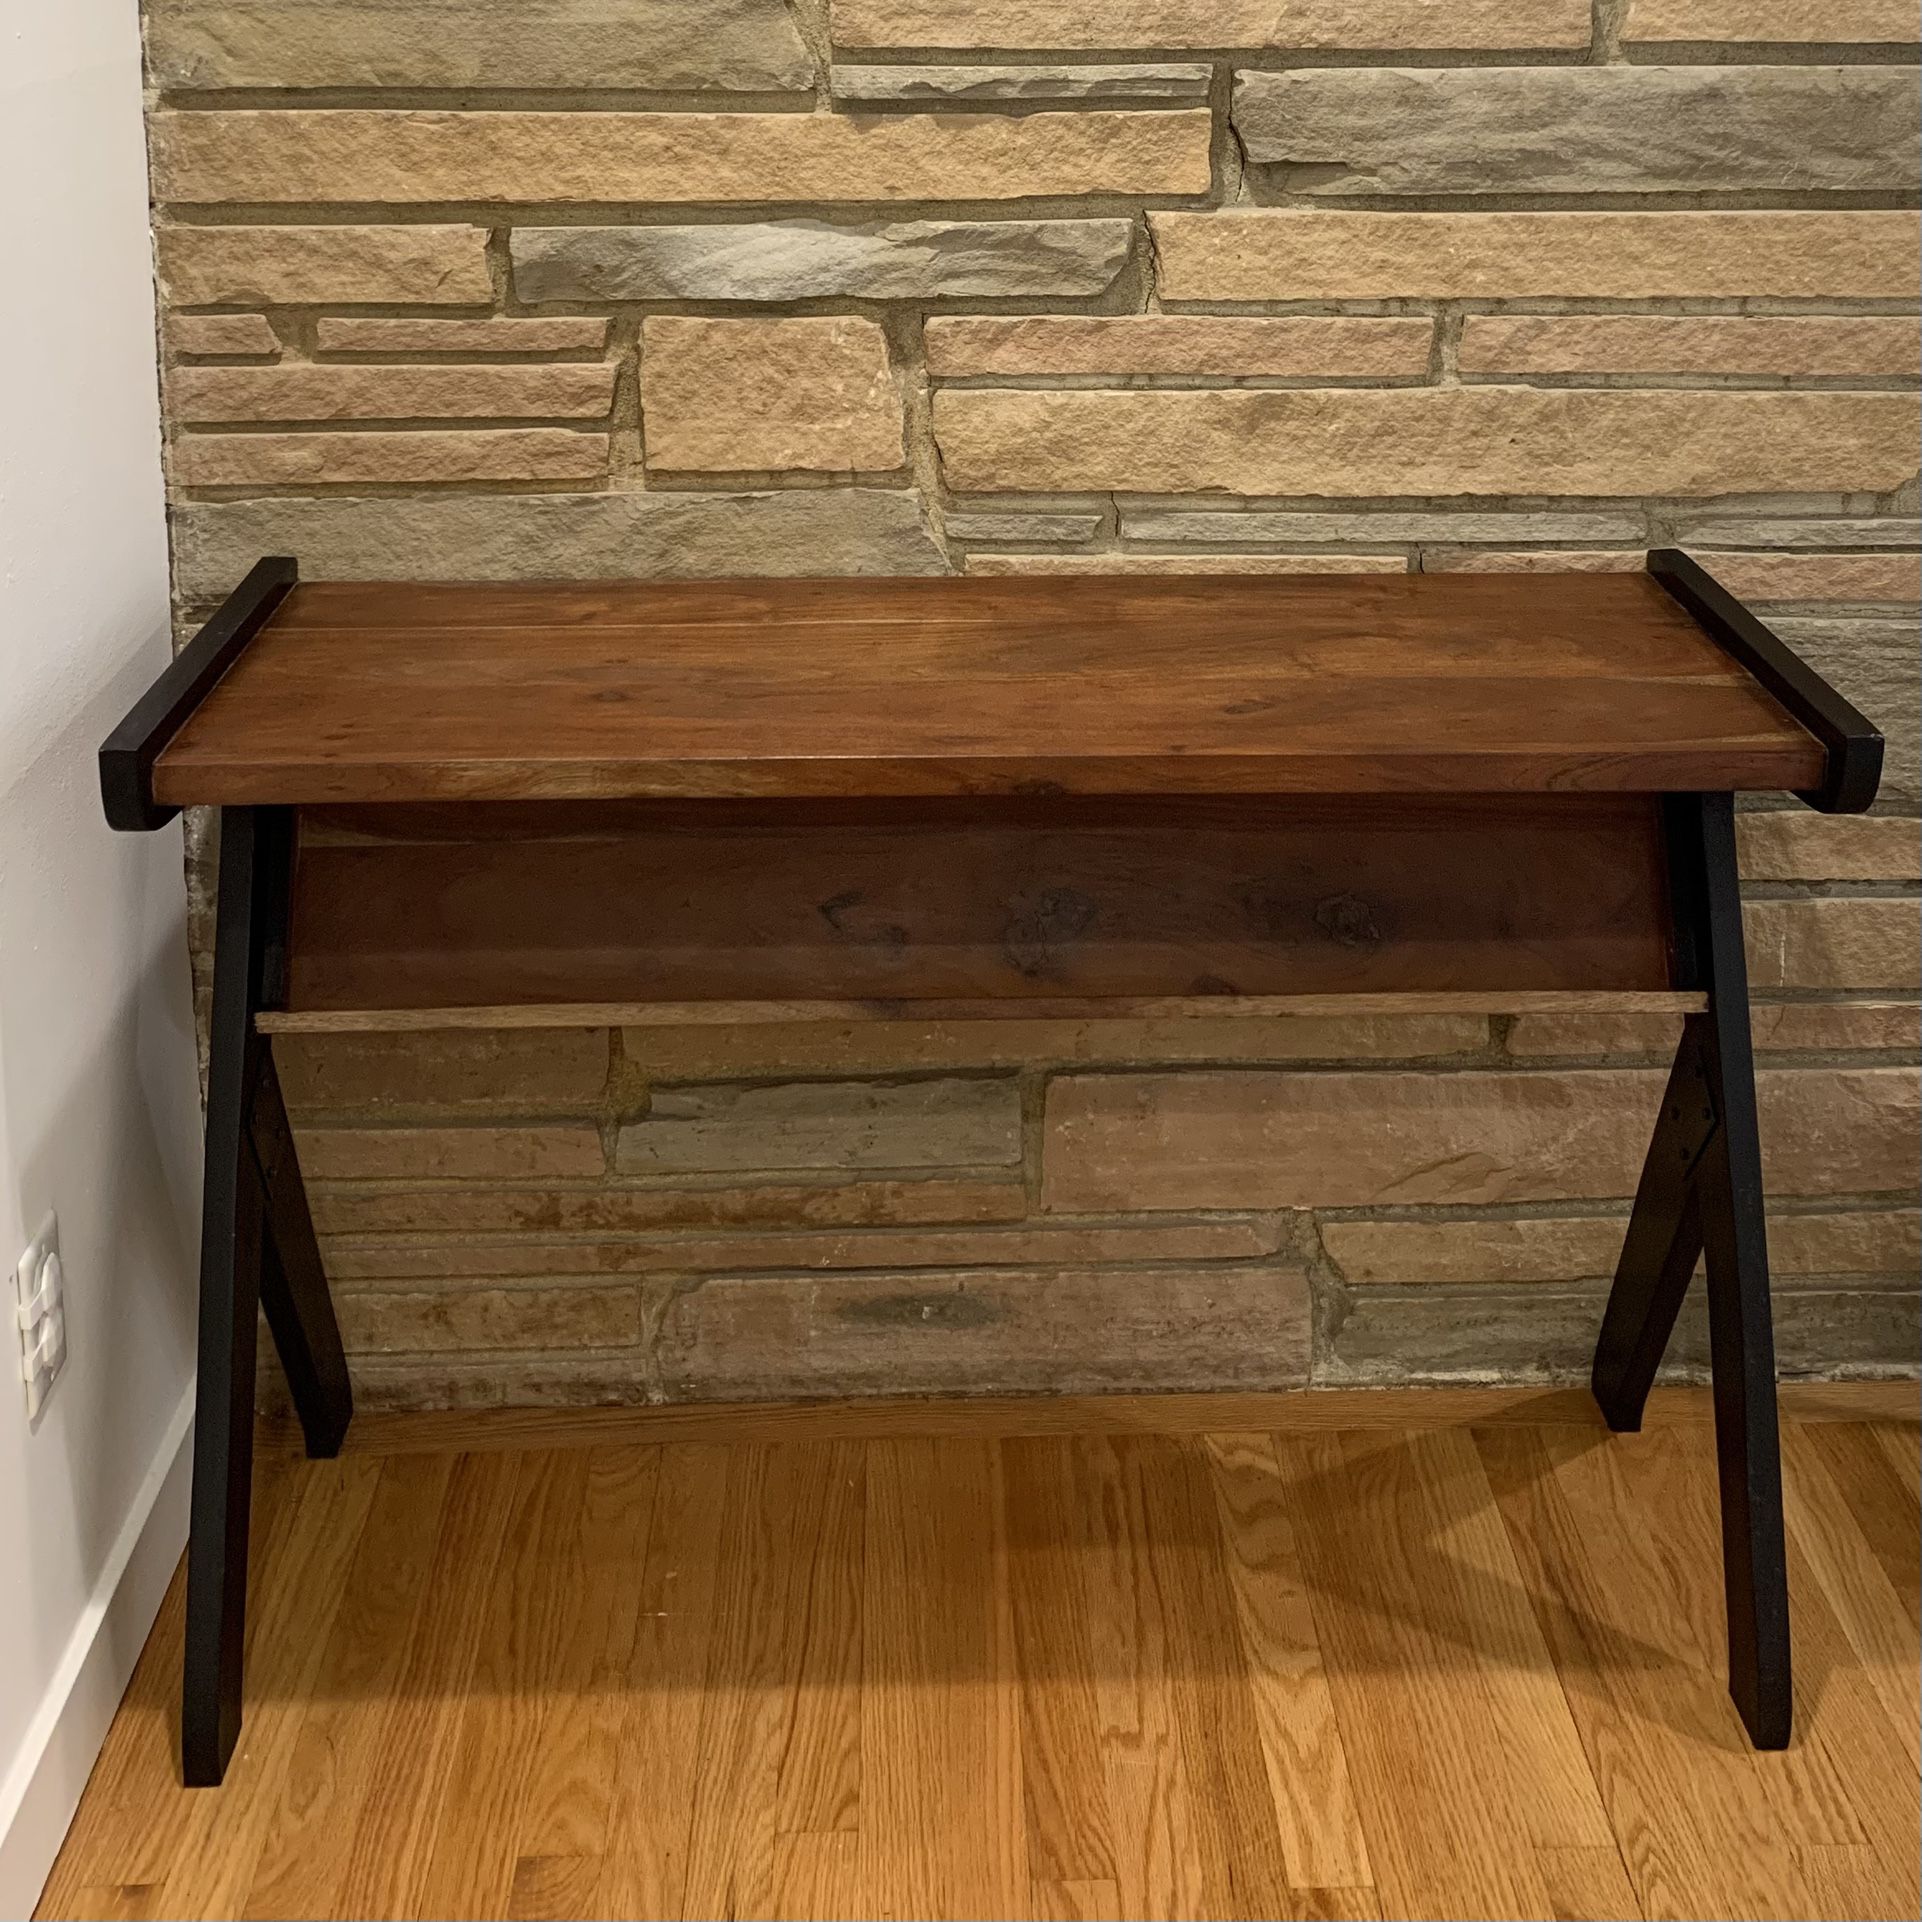 Wooden Console Table, Make me an offer! (originally $139)